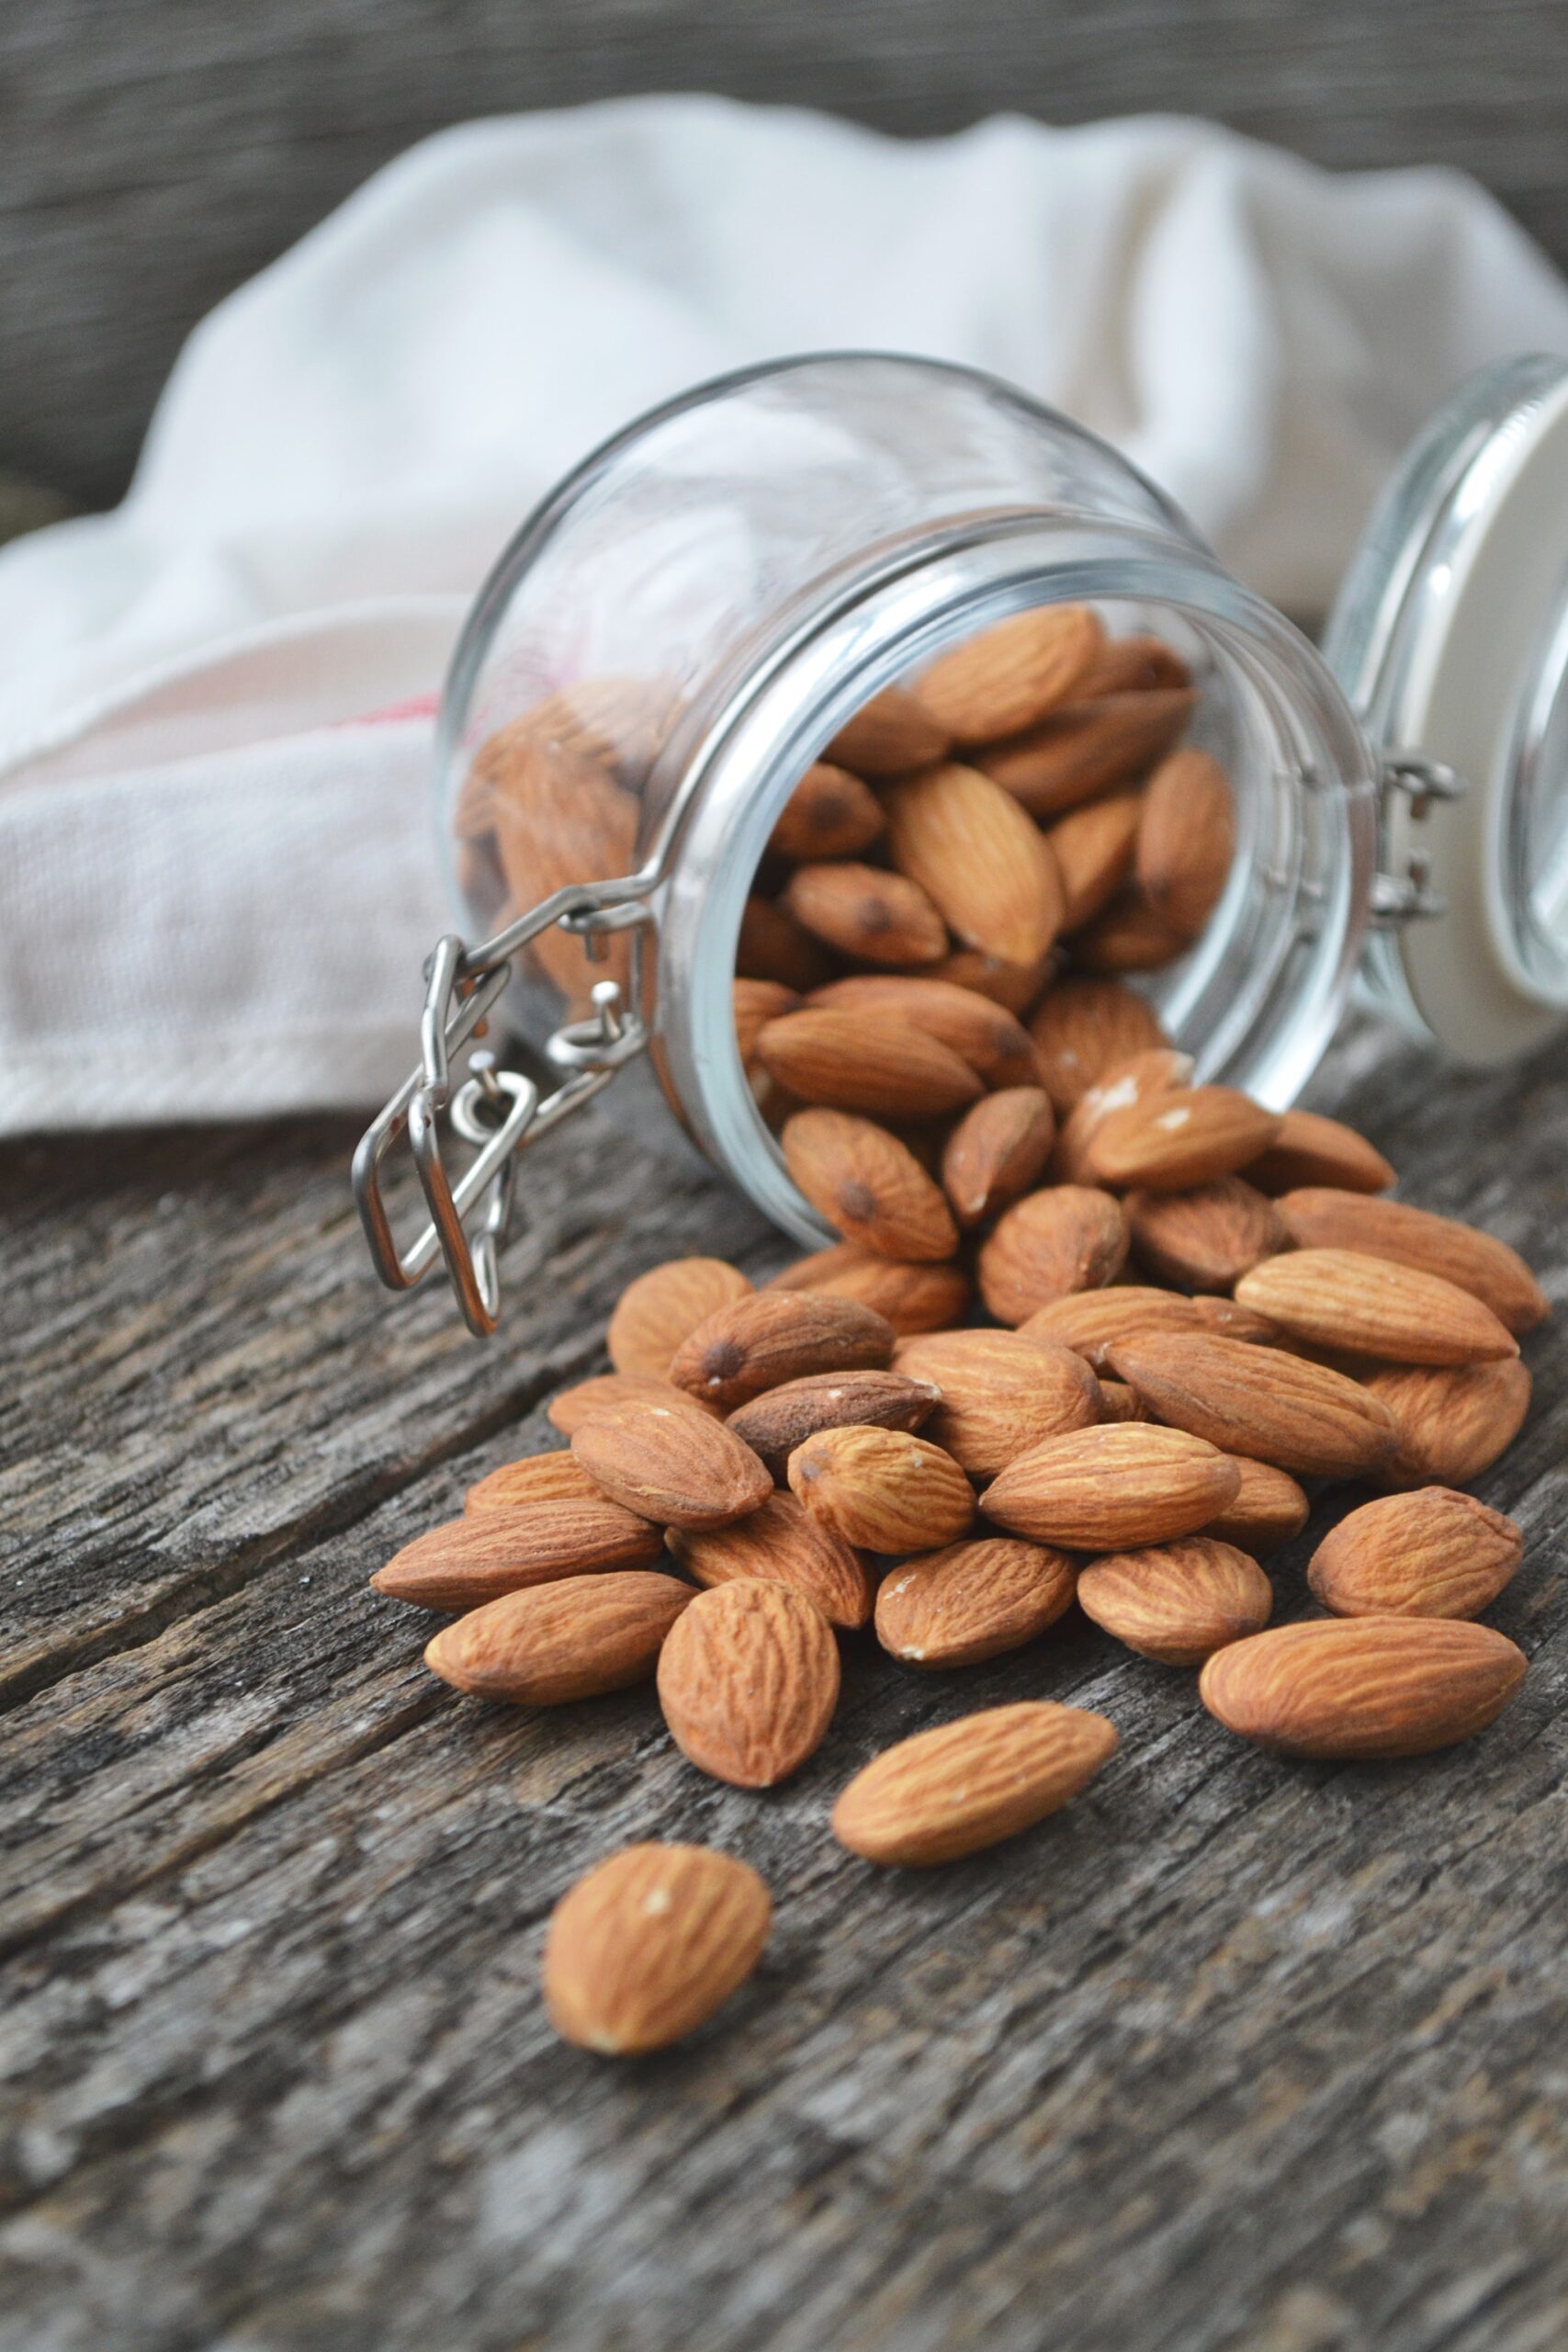 almonds falling out of a glass jar